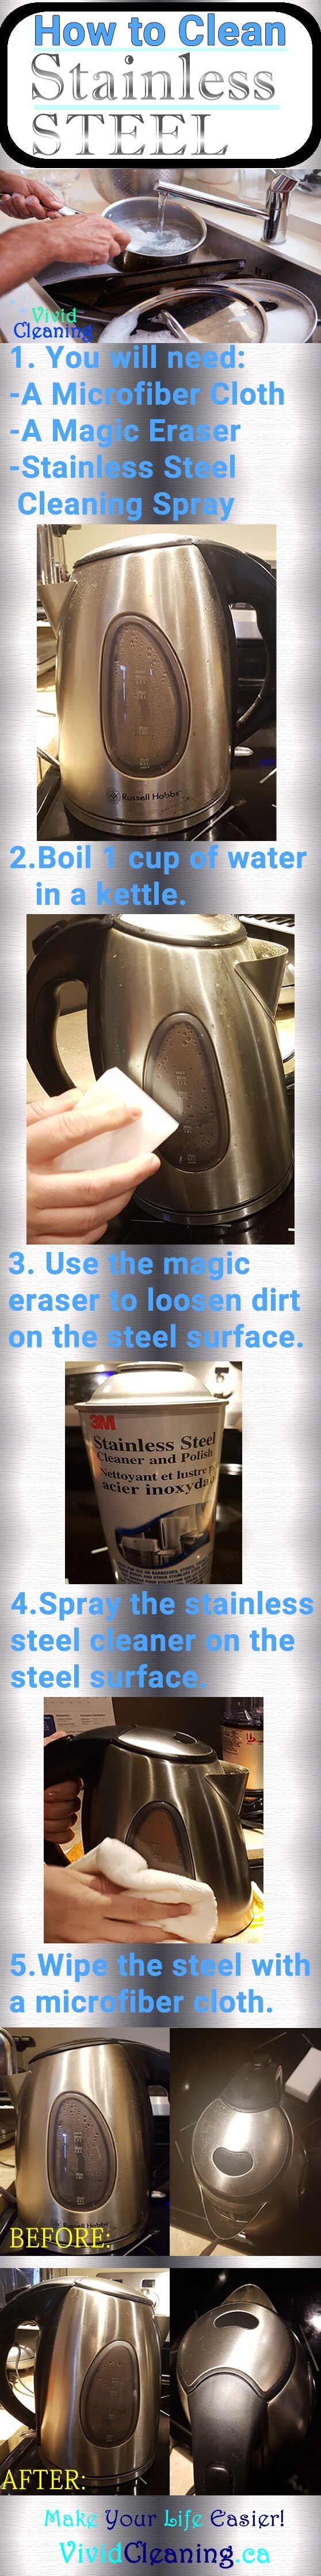 1.You will need: -A Microfiber Cloth -A Magic Eraser -Stainless Steel Cleaning Spray 2. Boil 1 cup of water in a kettle. 3. Use the magic eraser to loosen dirt on the steel surface. 4.Spray the stainless steel cleaner on the steel surface. 5.Wipe the steel with a microfiber cloth.